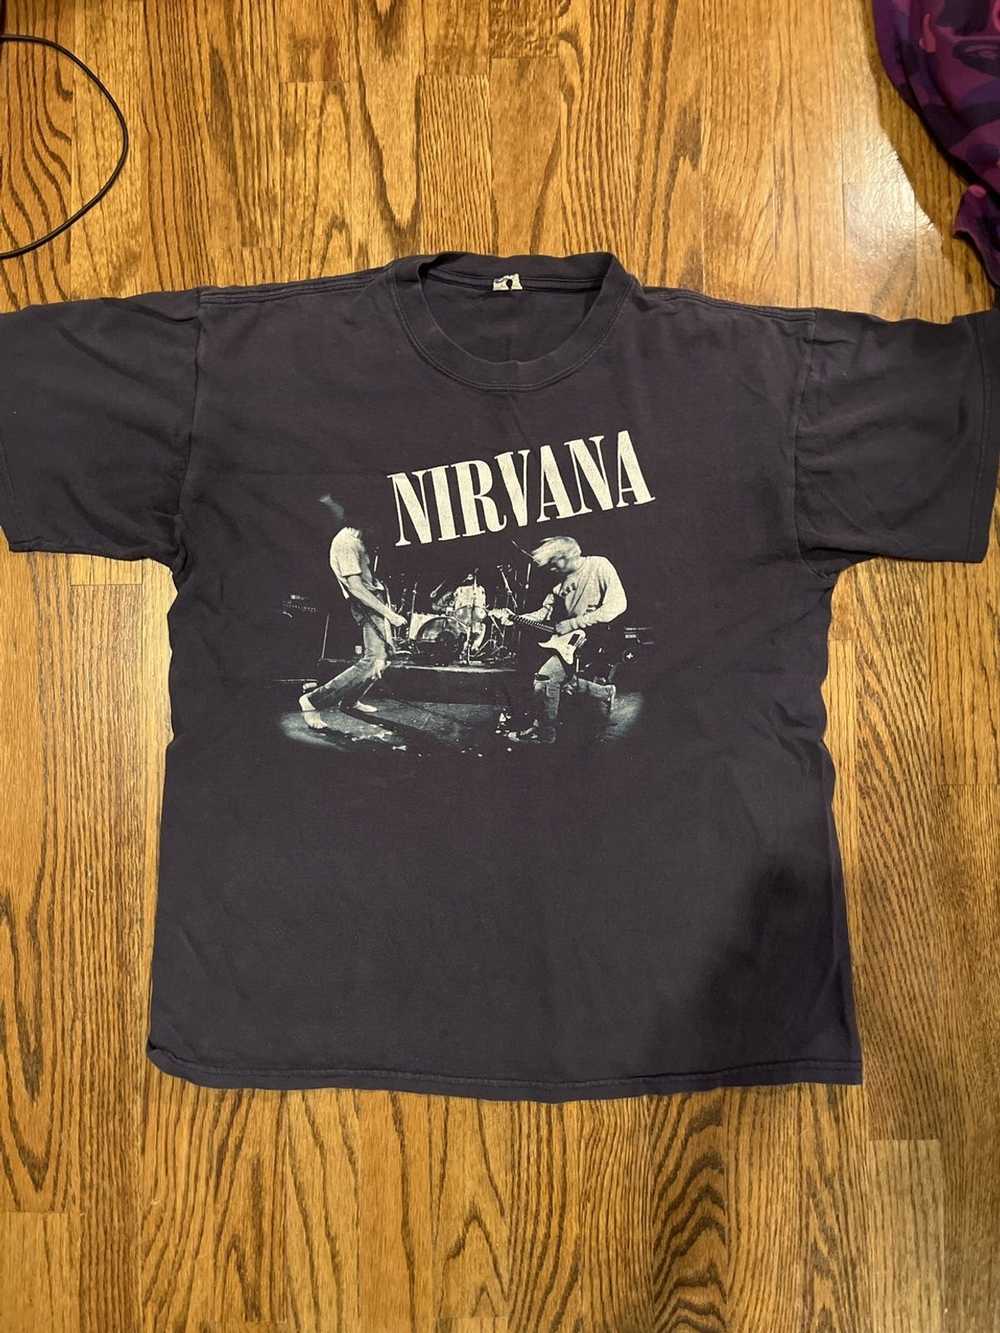 Vintage Nirvana shirt purchased at concert in ear… - image 1